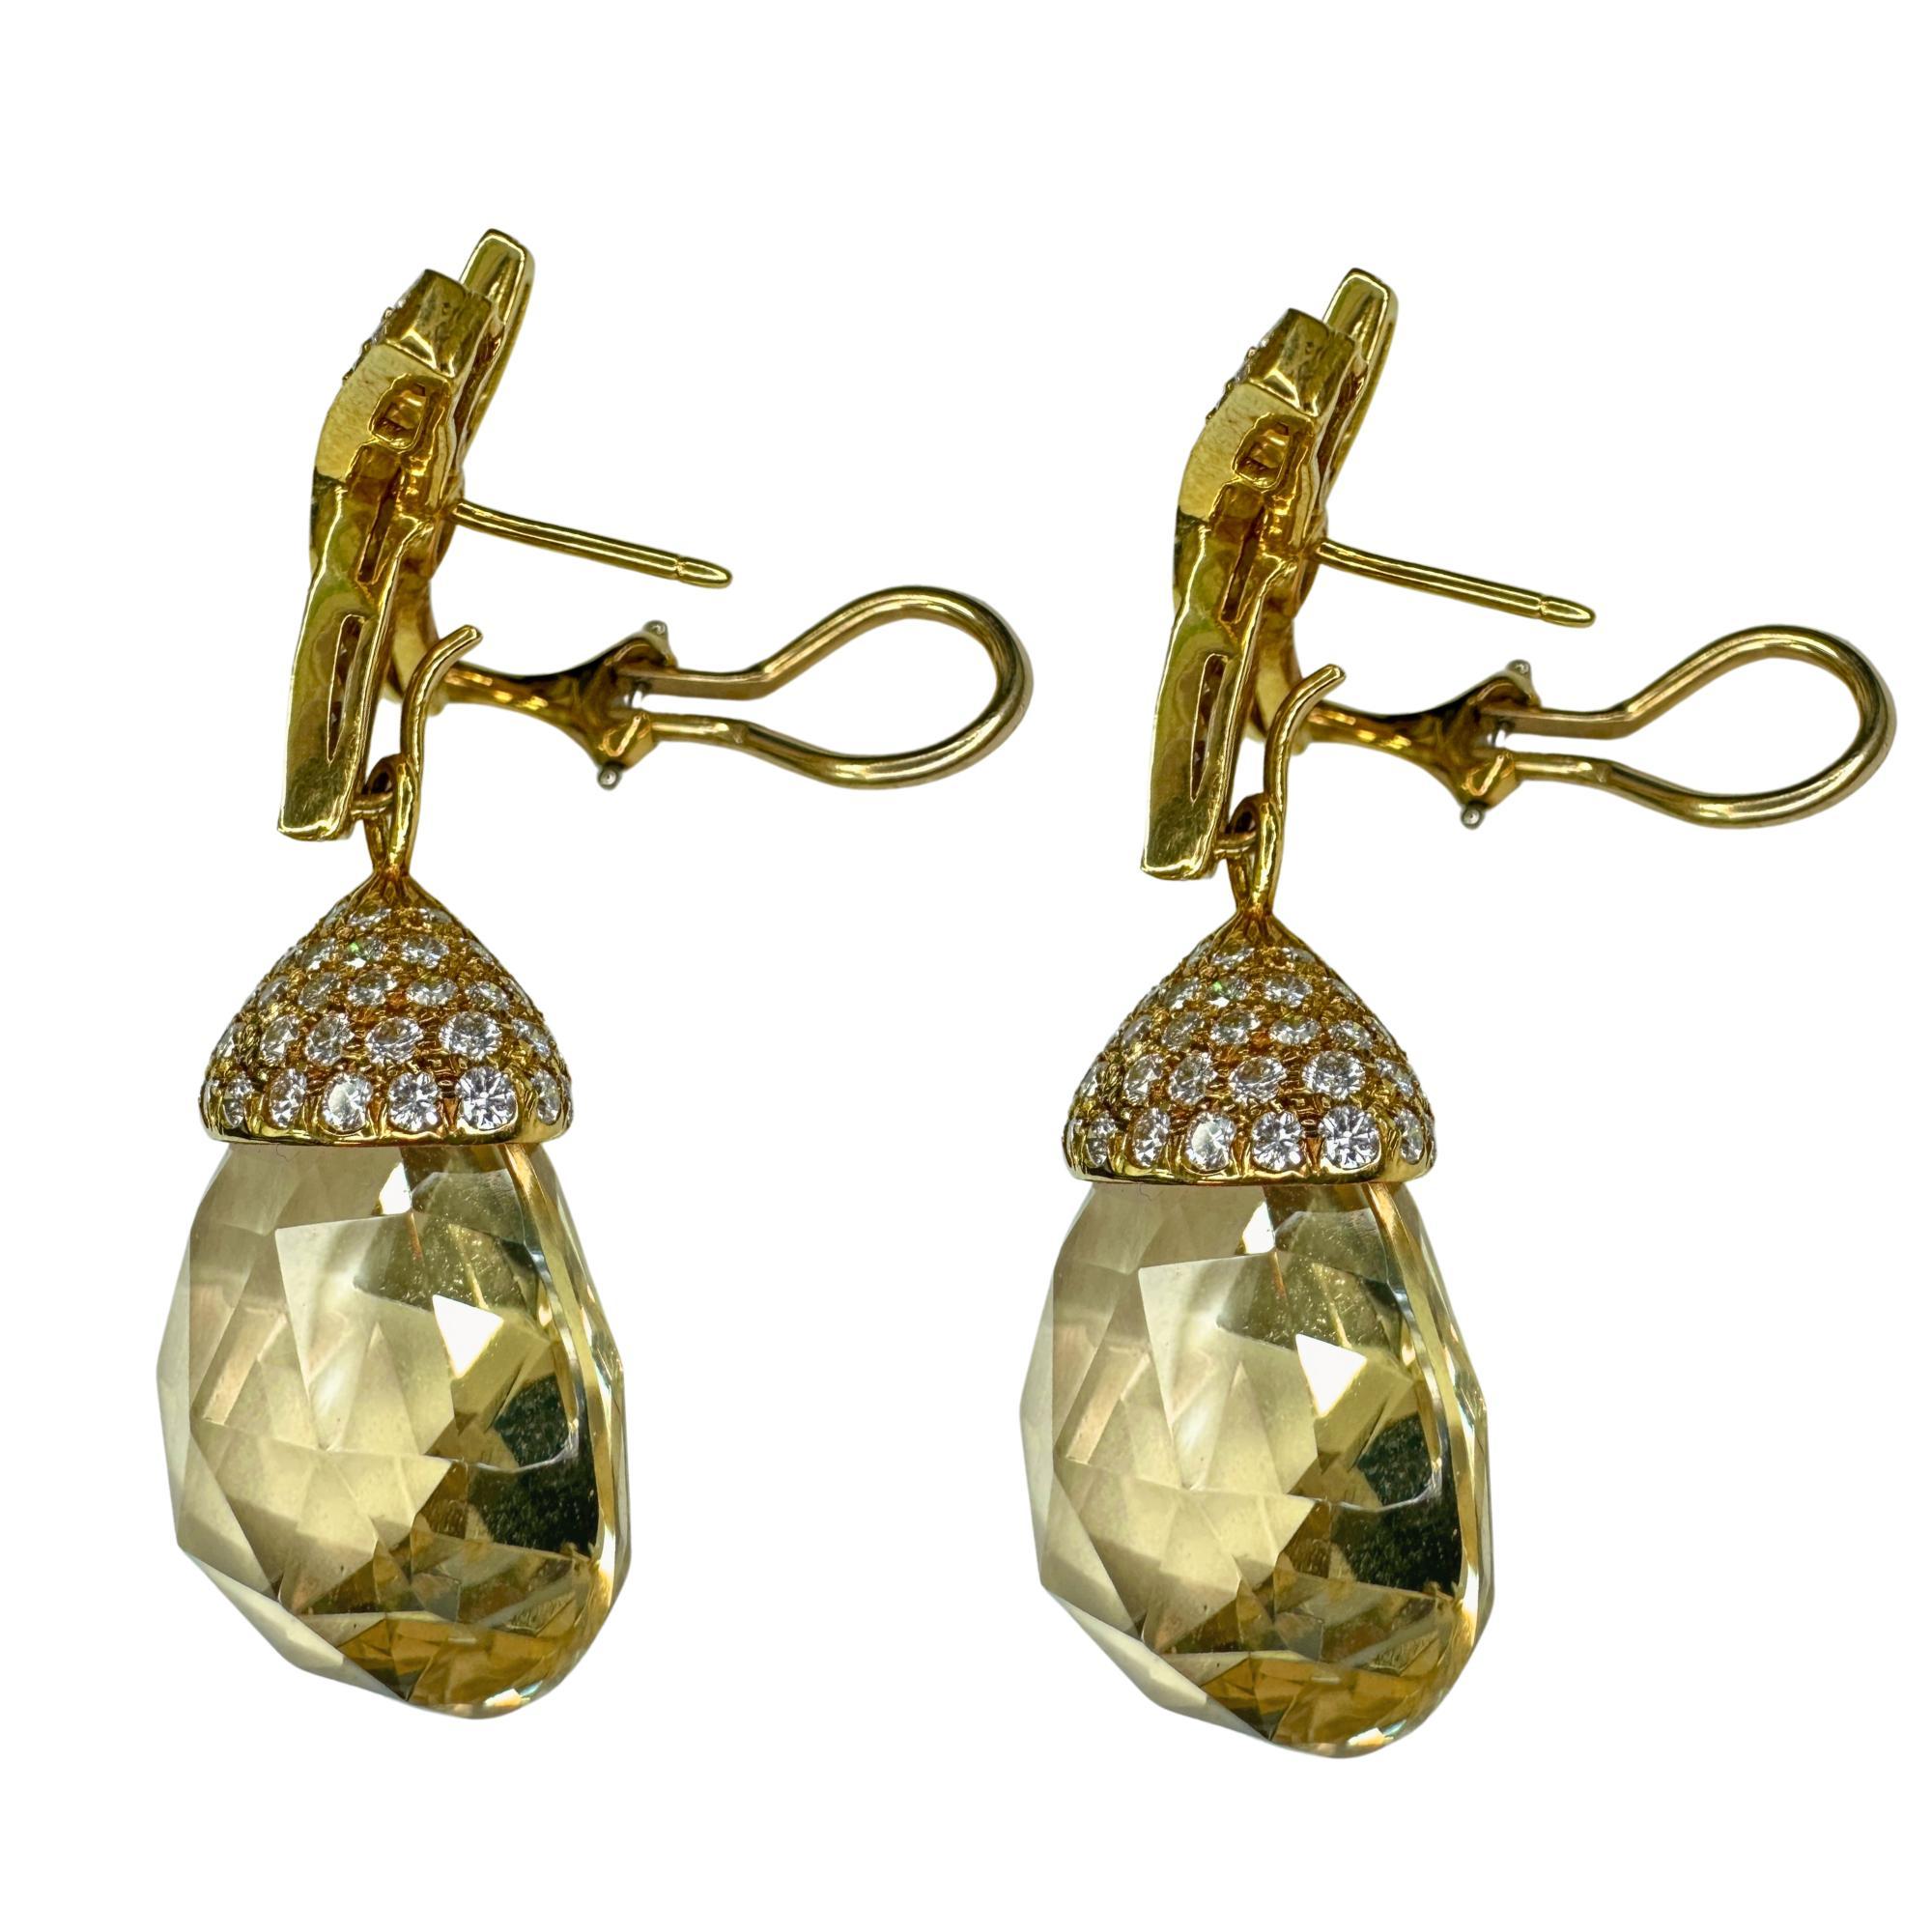 Round Cut 18k TIffany Diamond and Lemon Citrine Day-Night Earrings Signed Paloma Picasso For Sale